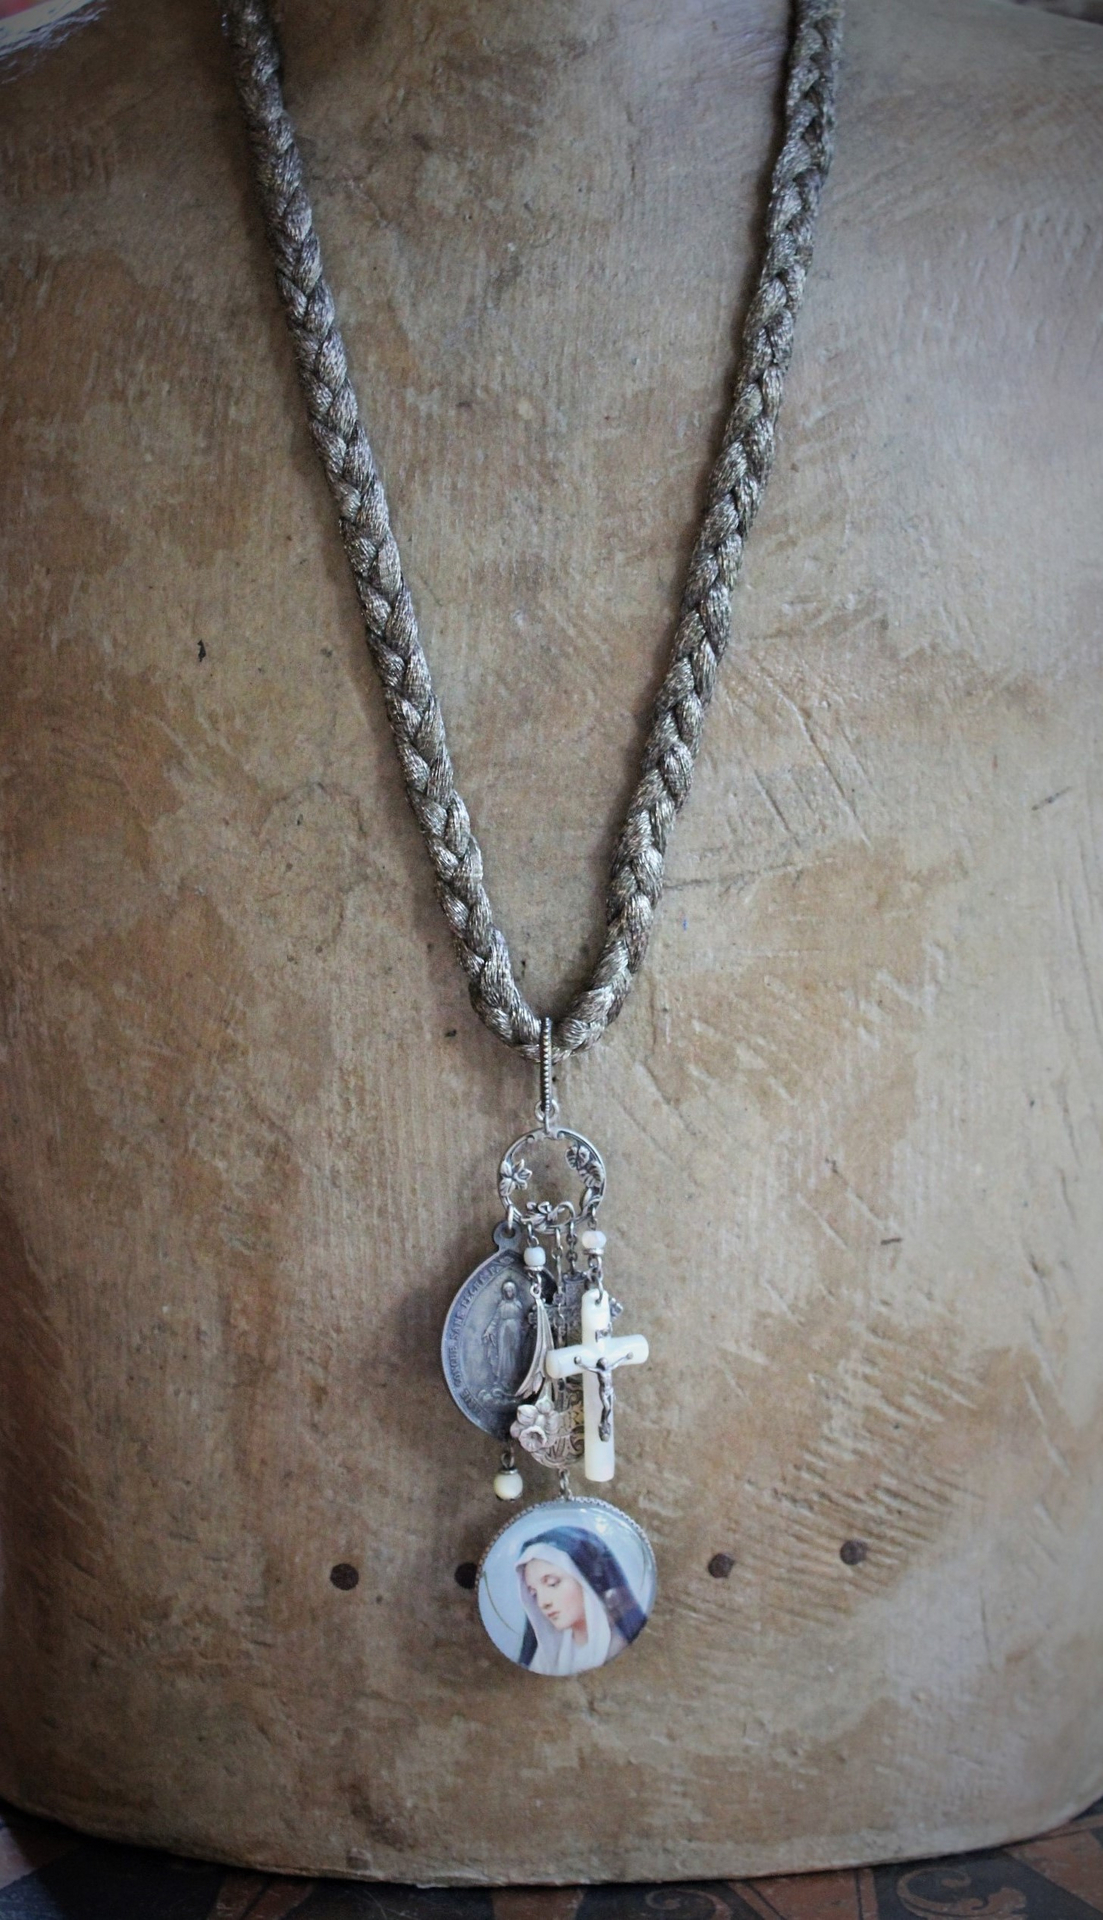 Hope and Love Necklace with Antique French Braided Chain,Glass Holy Card Marian Pendant,Antique Engraved "Mary" Love Token,Engraved "Fill my Heart with your Love" Cross & More!